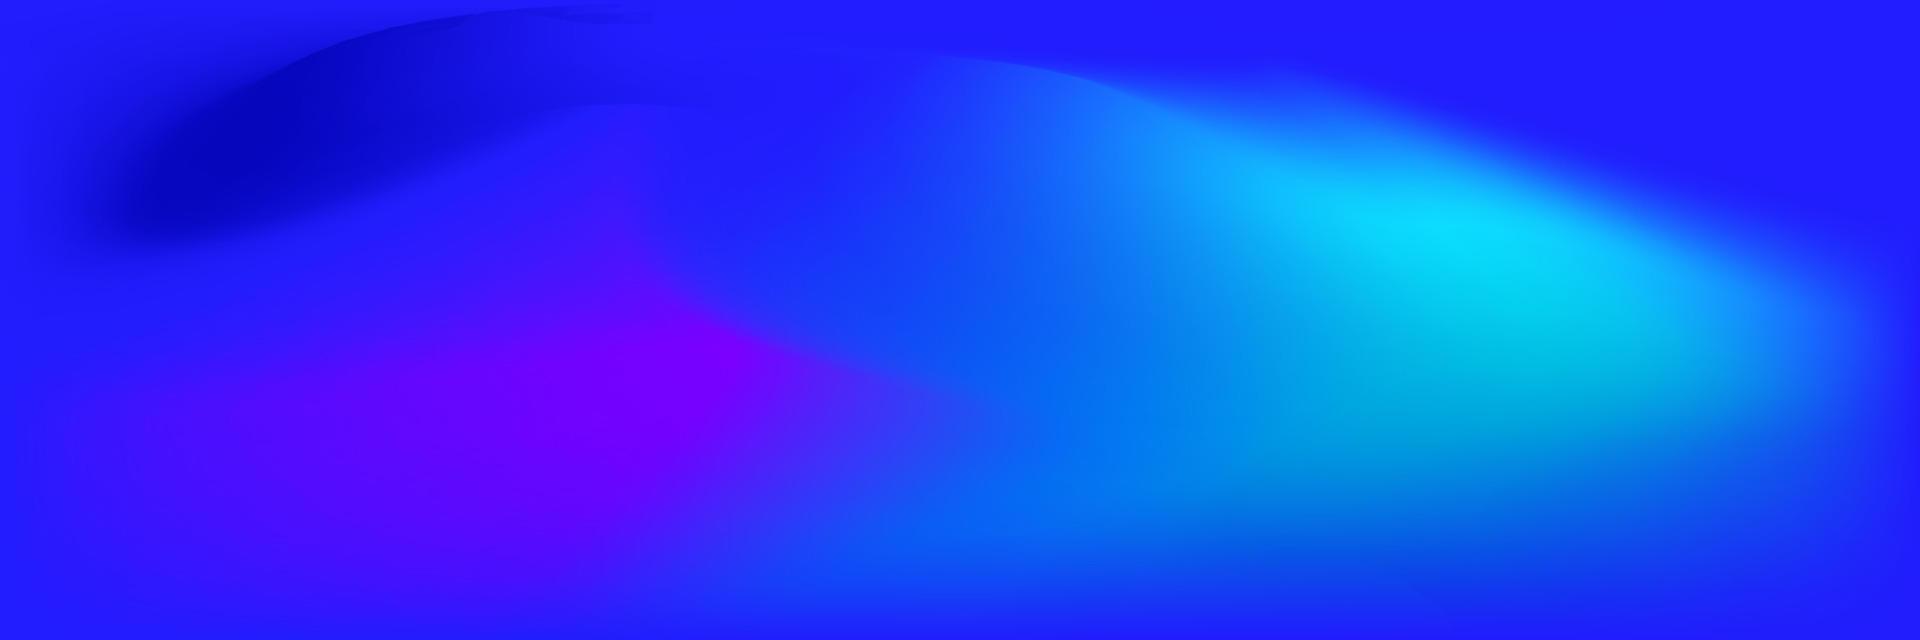 Vibrant background in blue color gradient vector